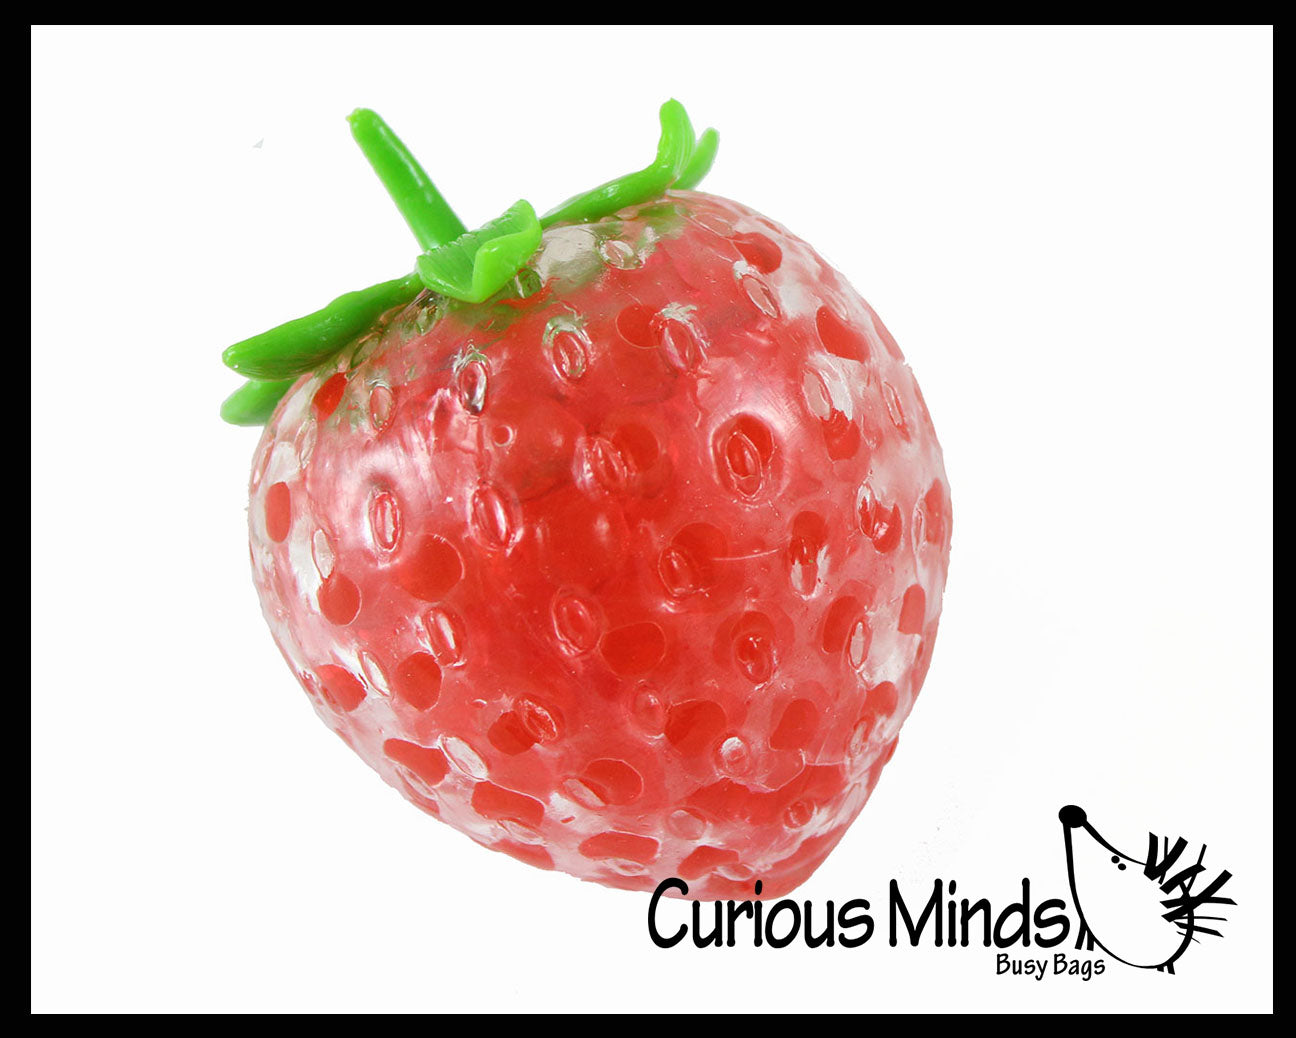 Strawberry Squeeze Toy Eye Popping Strawberry Squeeze Toy Stretchy